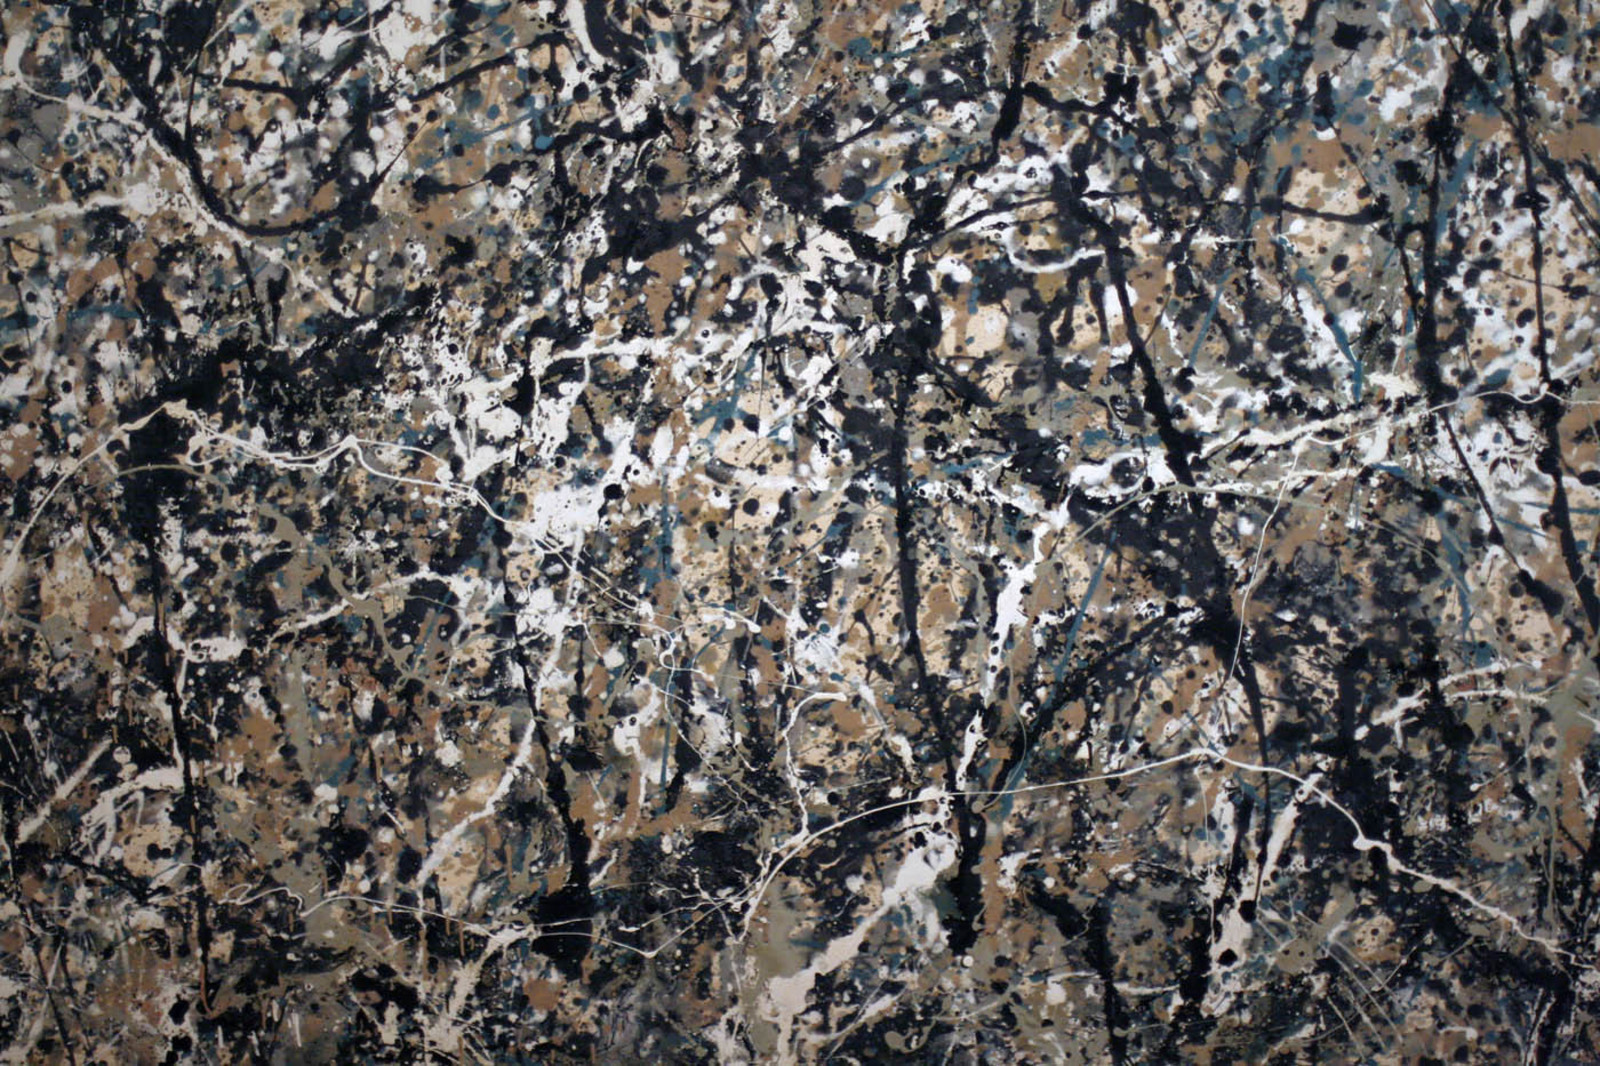 Jackson Pollock. One (Number 31). 1950. Mixed media on canvas. 530.8 x 269.5 cm. Museum of Modern Art, New York